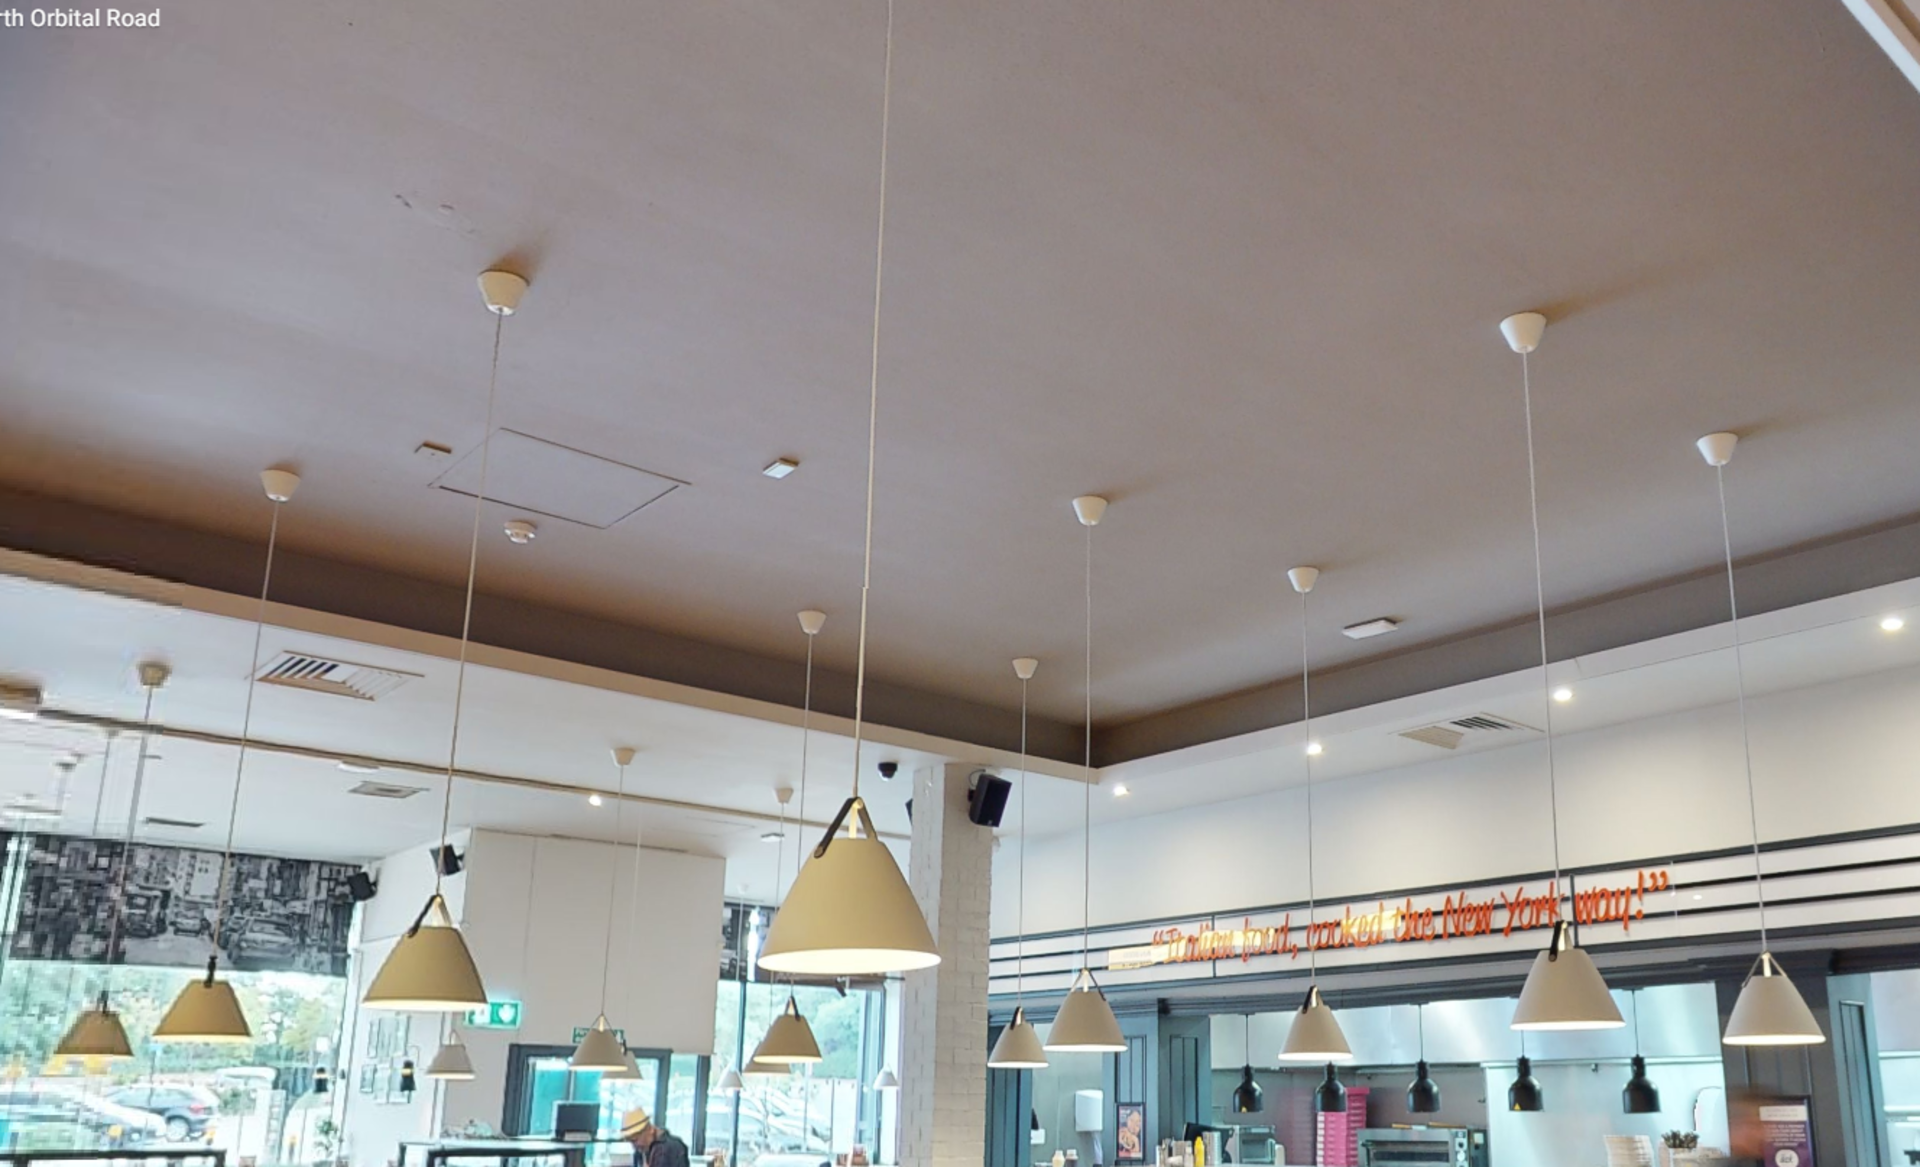 6 x Suspending Ceiling Pendant Lights Featuring Beige Metal Shades With Brown Leather Straps - Image 4 of 6